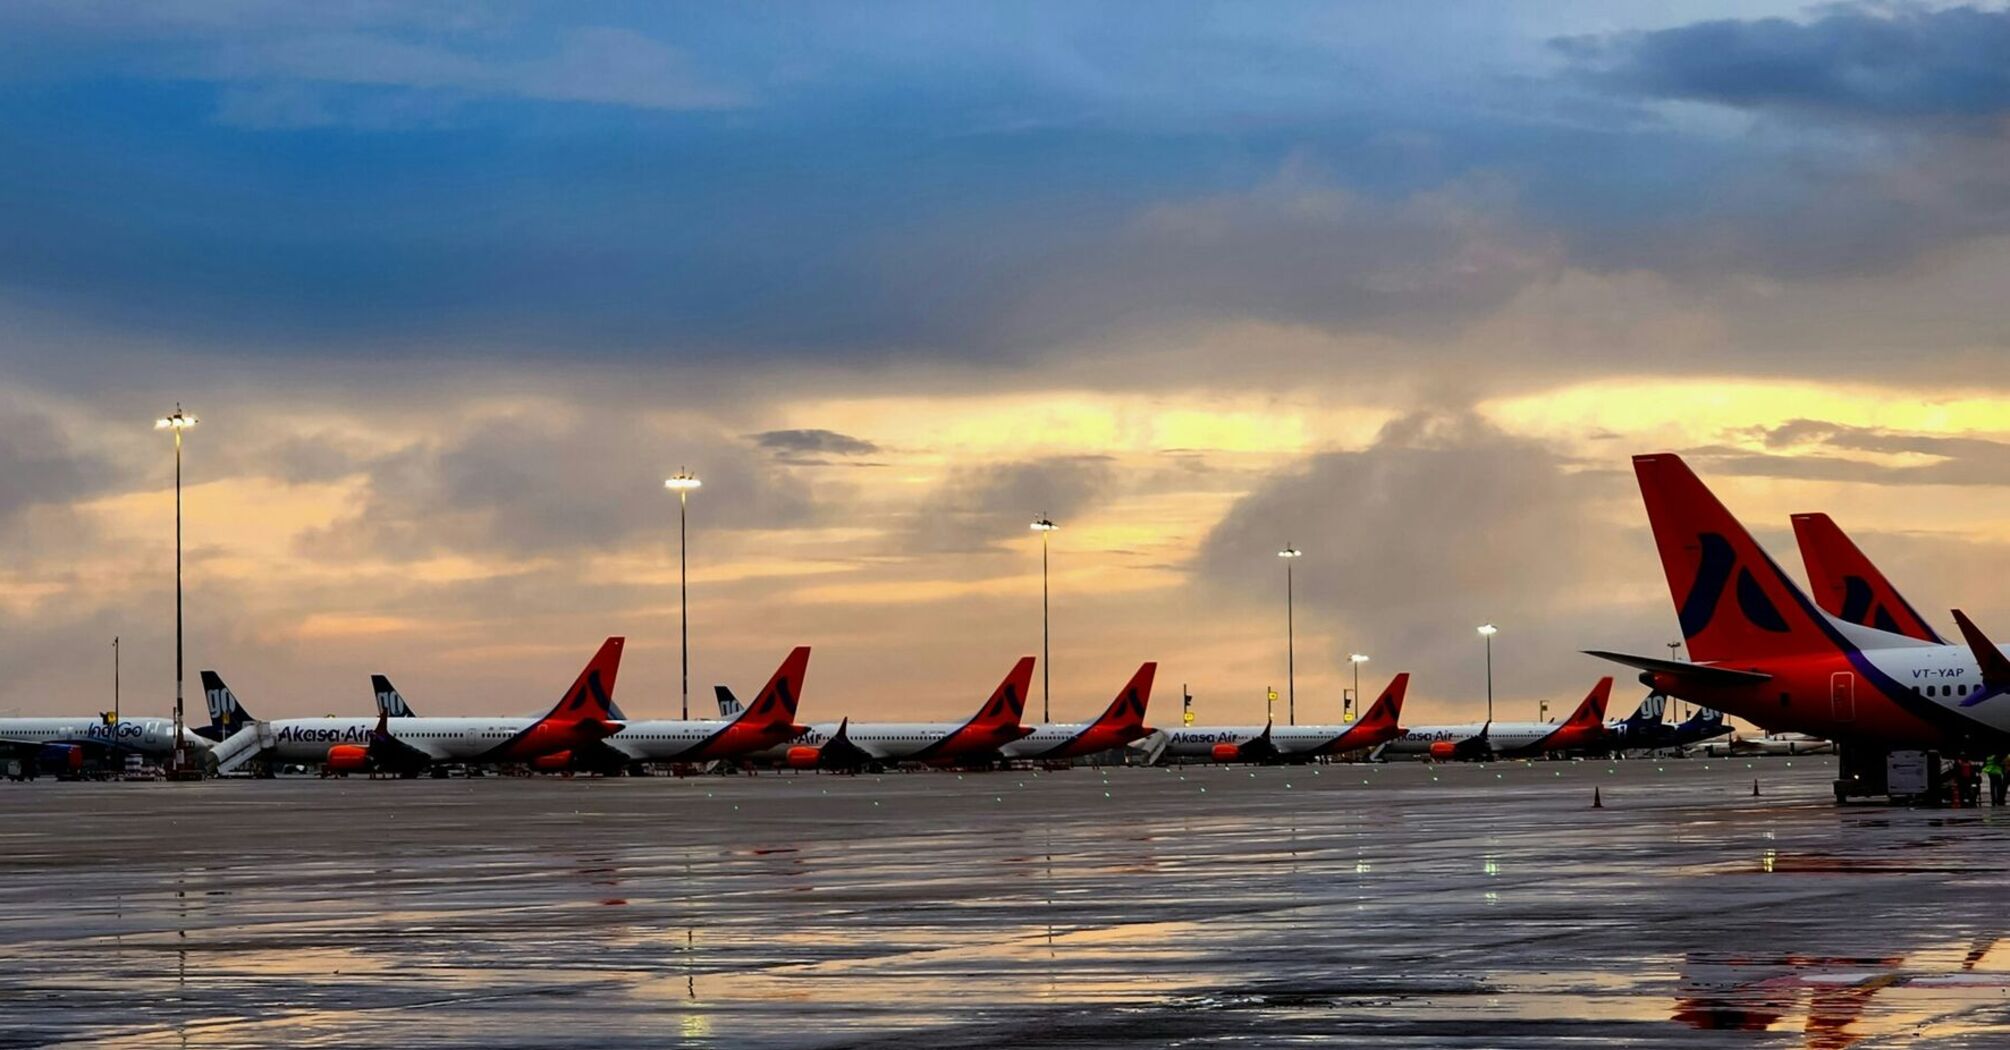 Line of Akasa Air planes on a wet tarmac at dusk with lit lampposts and a dramatic cloudy sky in the background